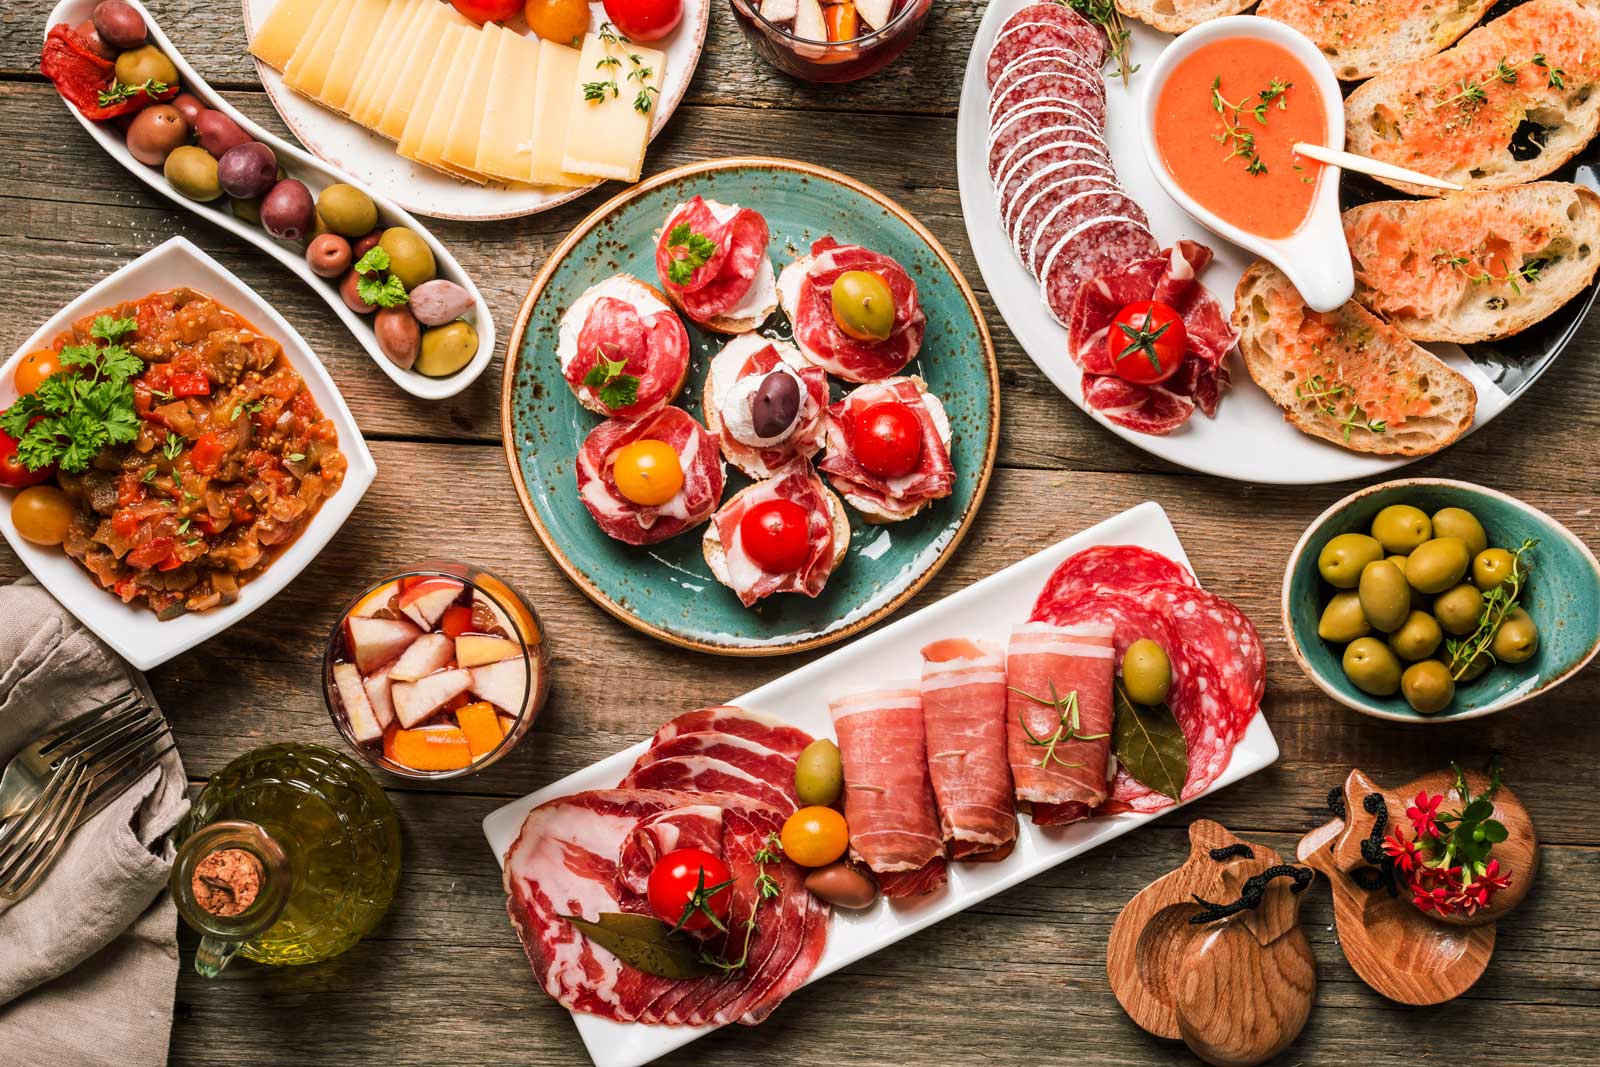 Top 5 Traditional Spanish Dishes| Some popular Spanish Ingredients